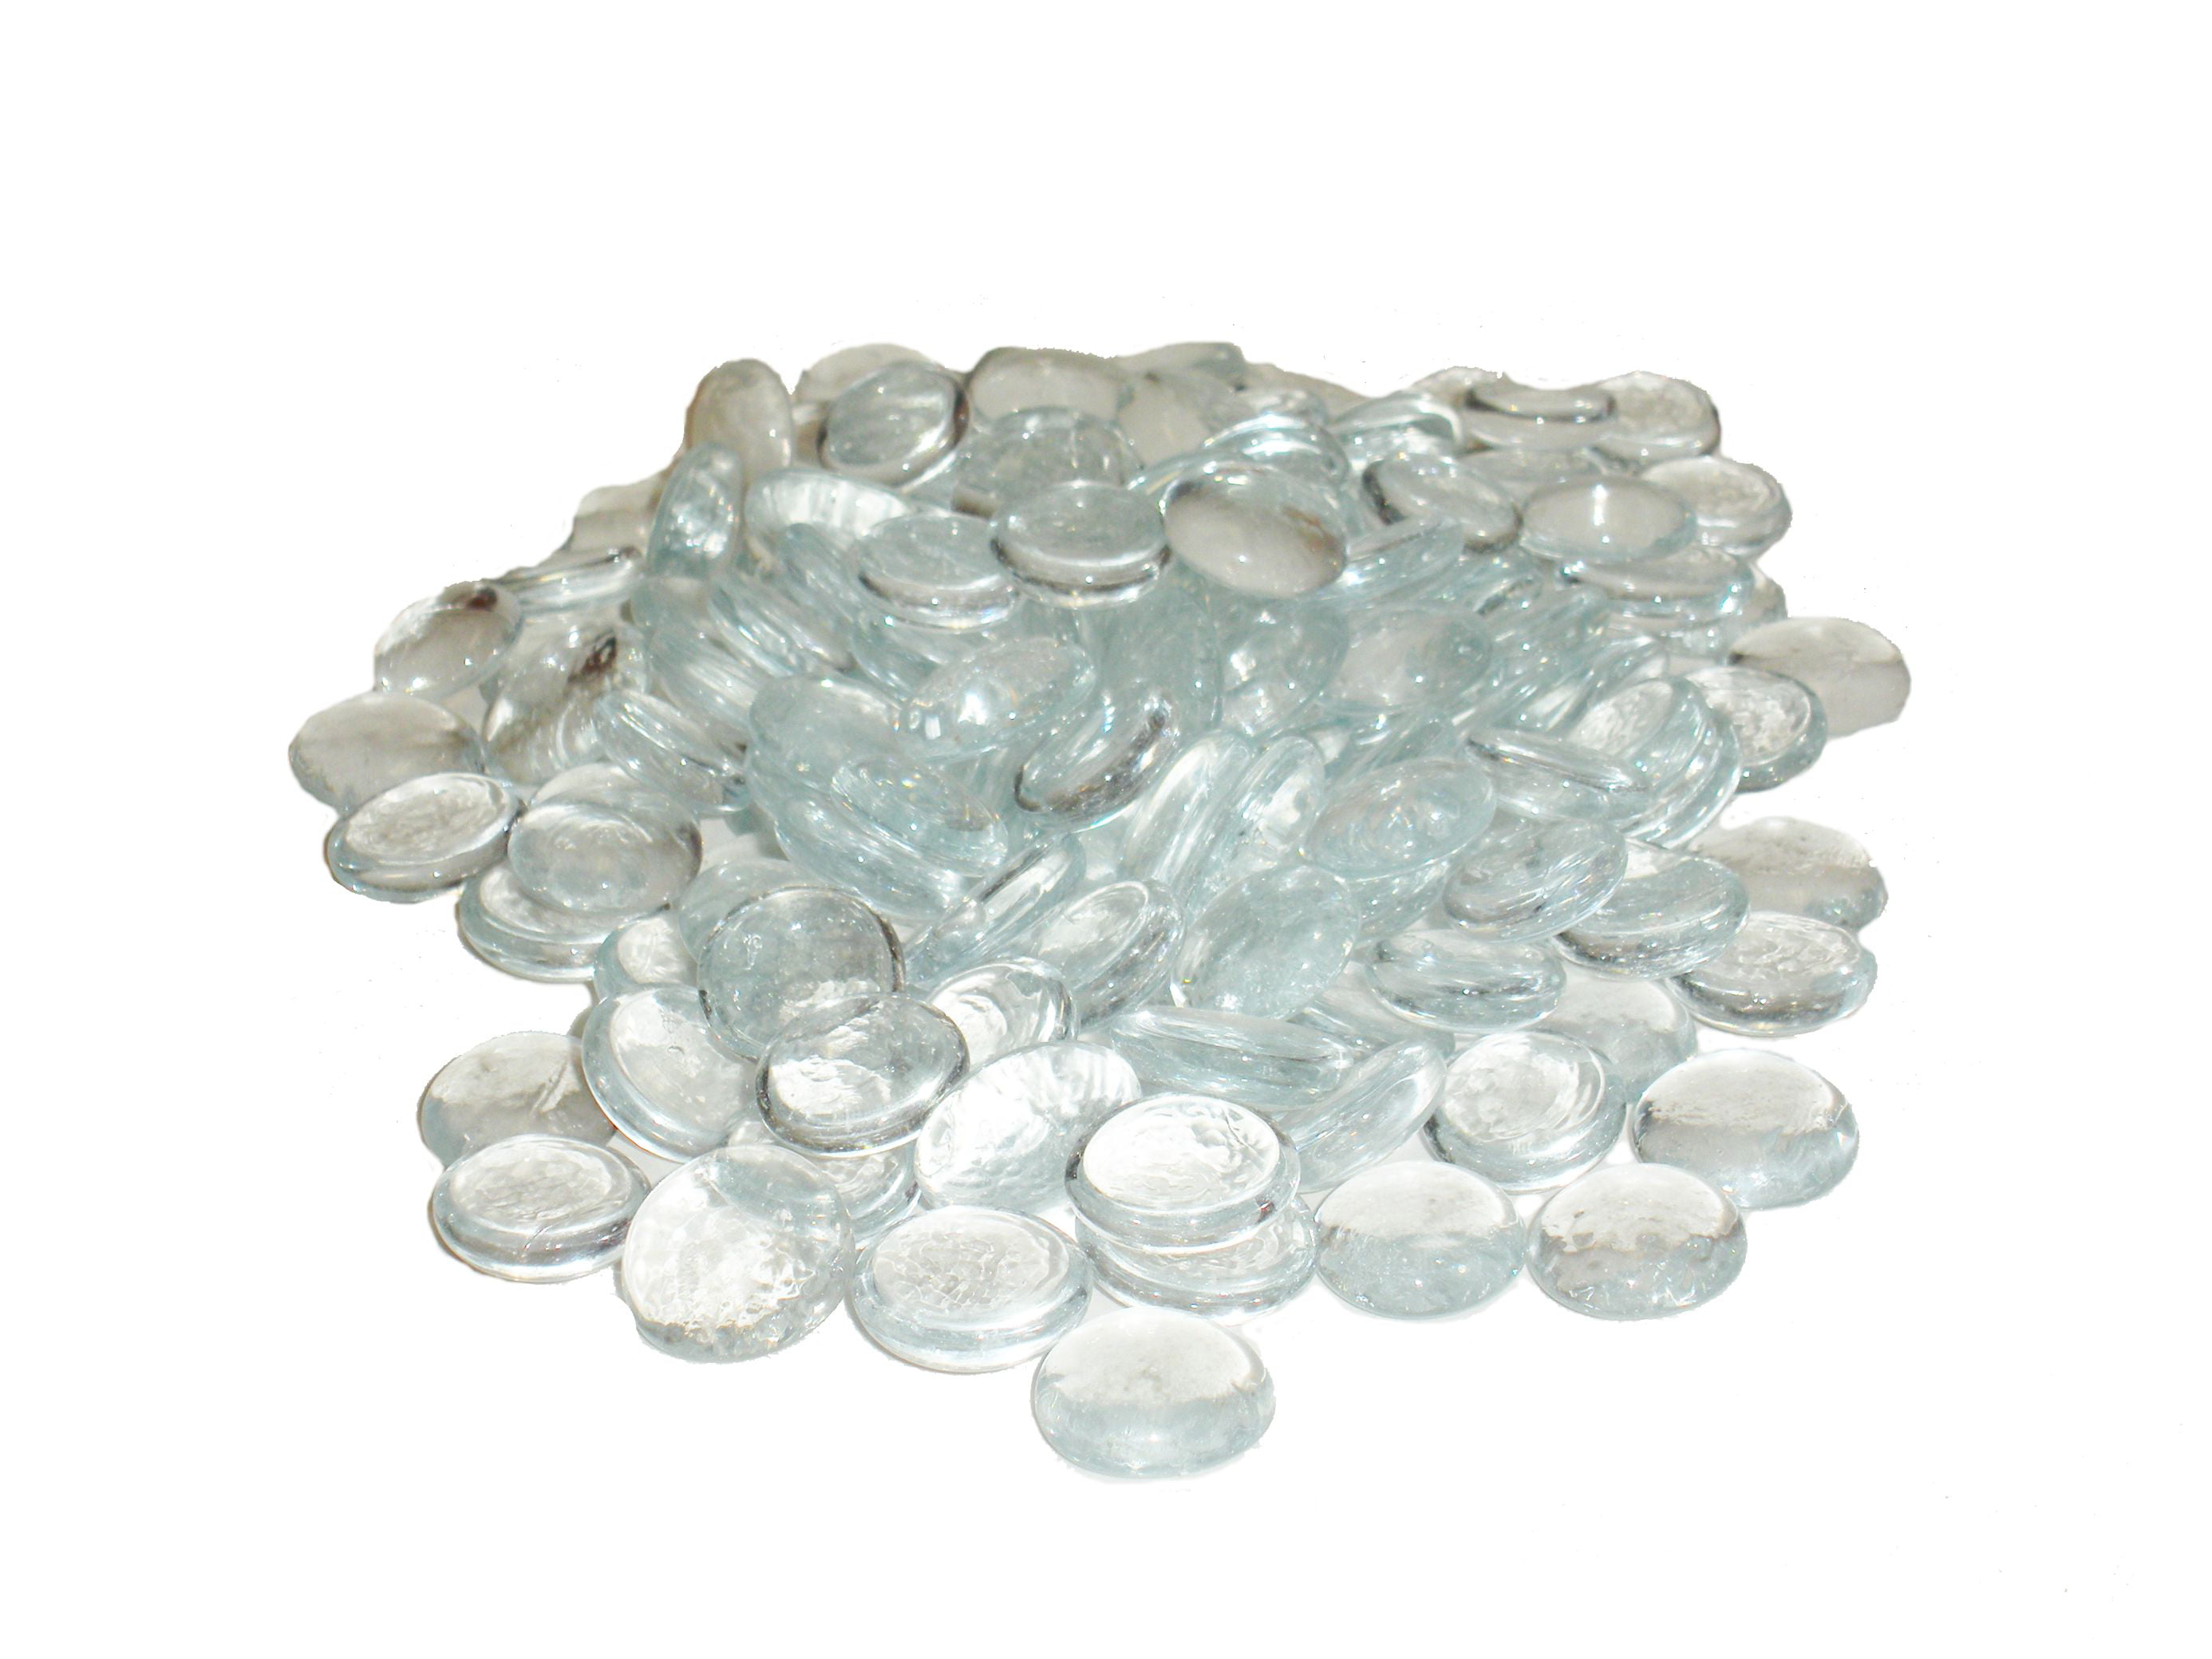 12 lbs 1000 Clear Glass Pebbles Flat Bottom Gem Stones Marbles Vase Fillers 